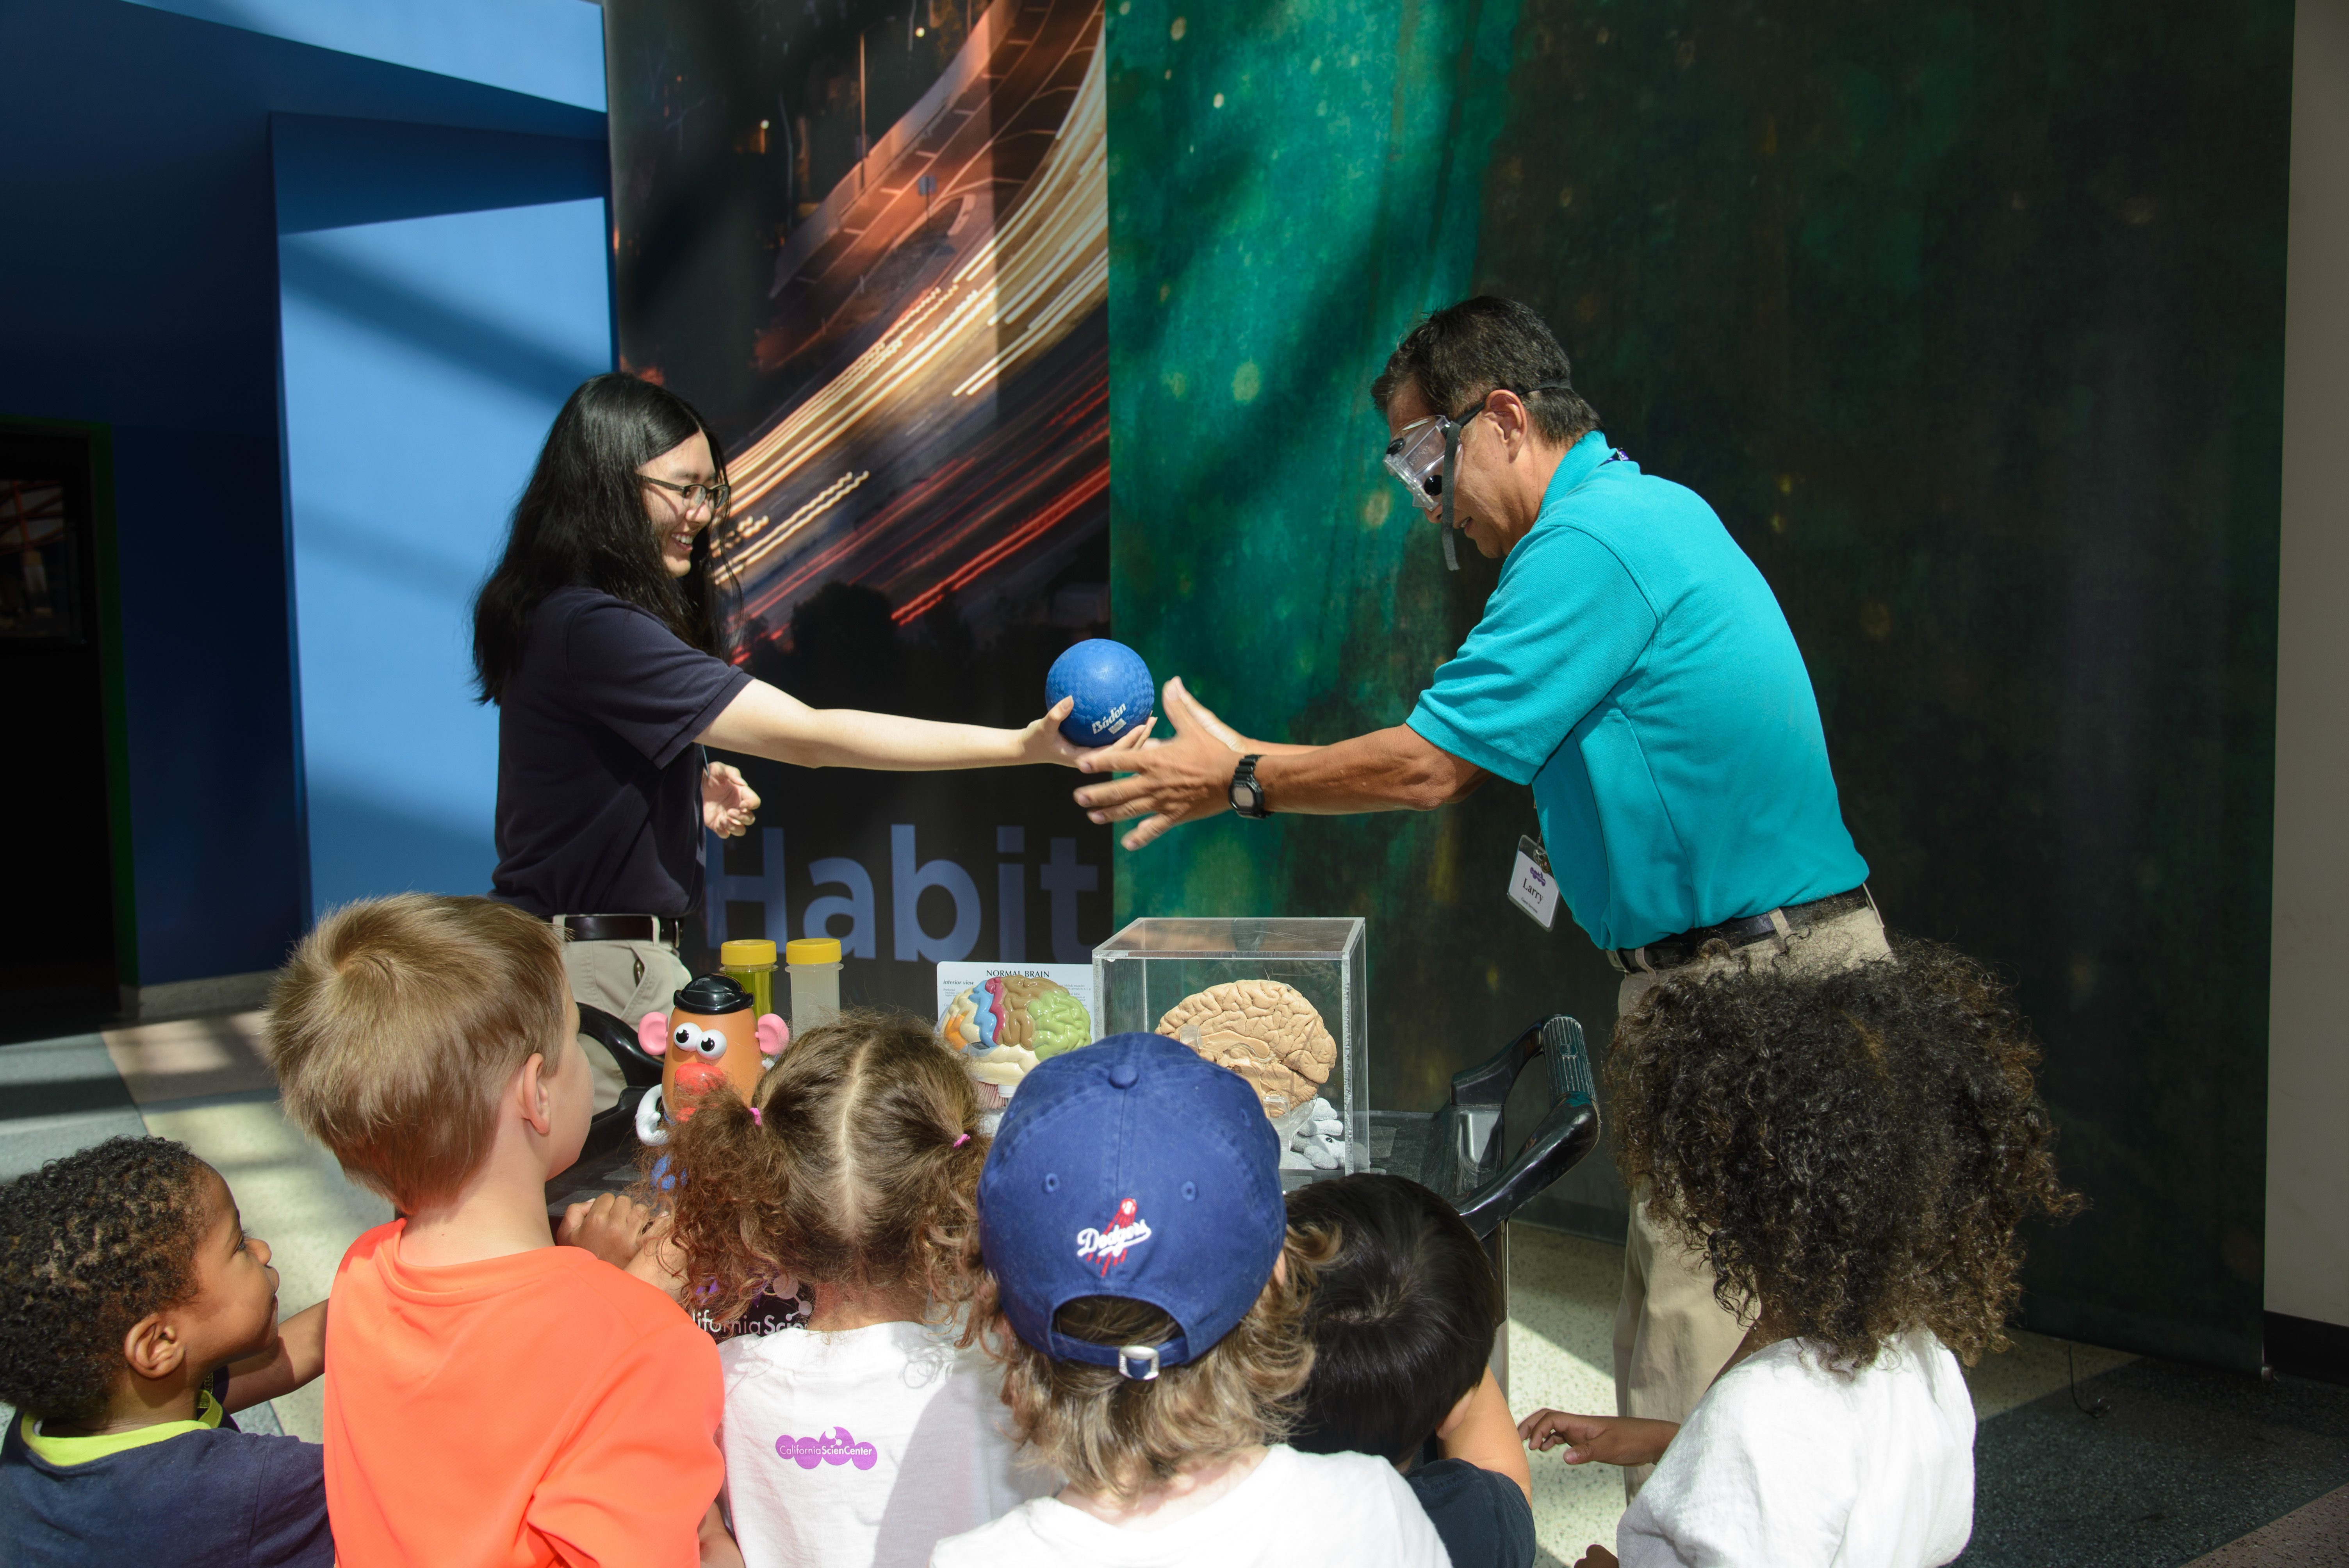 cation team member and Volunteer demonstrate science concept at a cart by passing each other a small blue rubber ball while group of kids watch